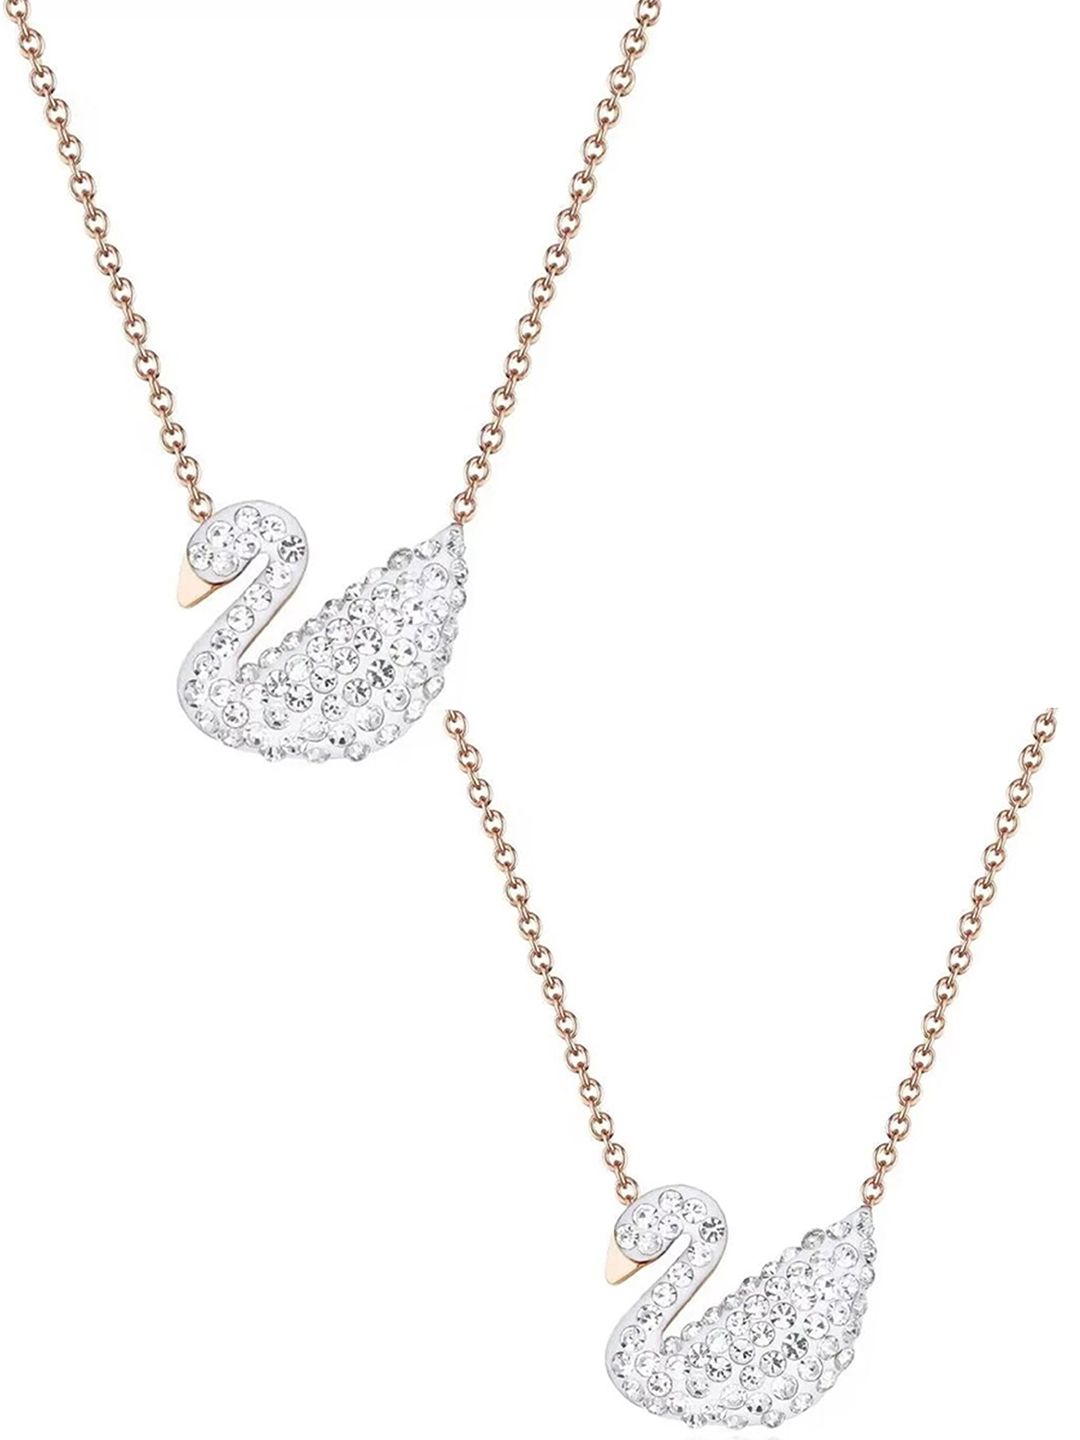 Vembley Set of 2 Gold-Plated Swan Pendant Necklaces Price in India